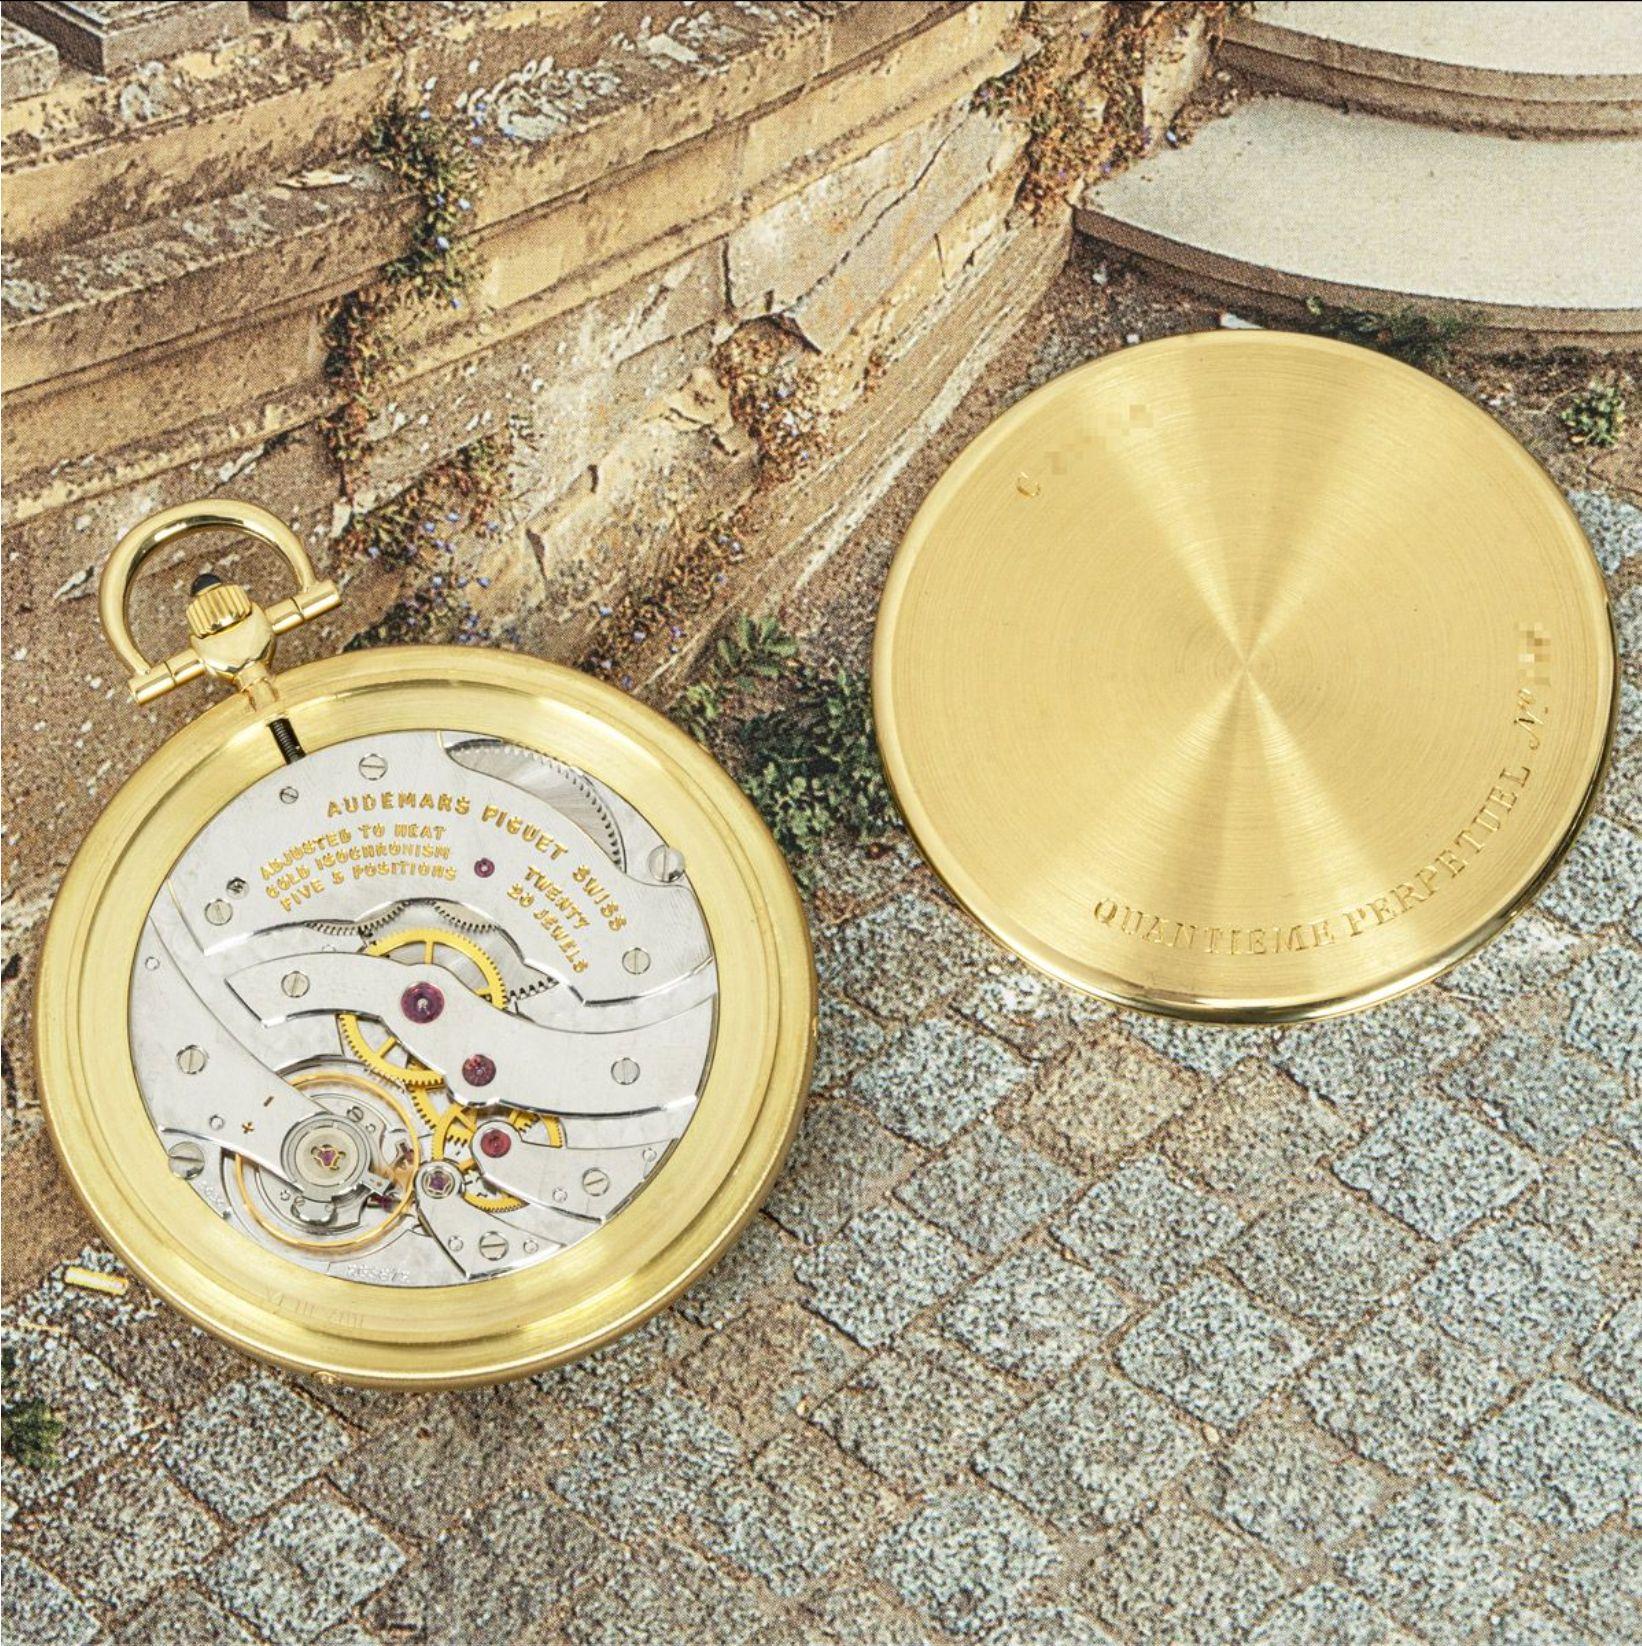 Audemar Piguet Yellow Gold Perpetual Calendar Pocket Watch C1970 In Excellent Condition For Sale In London, GB